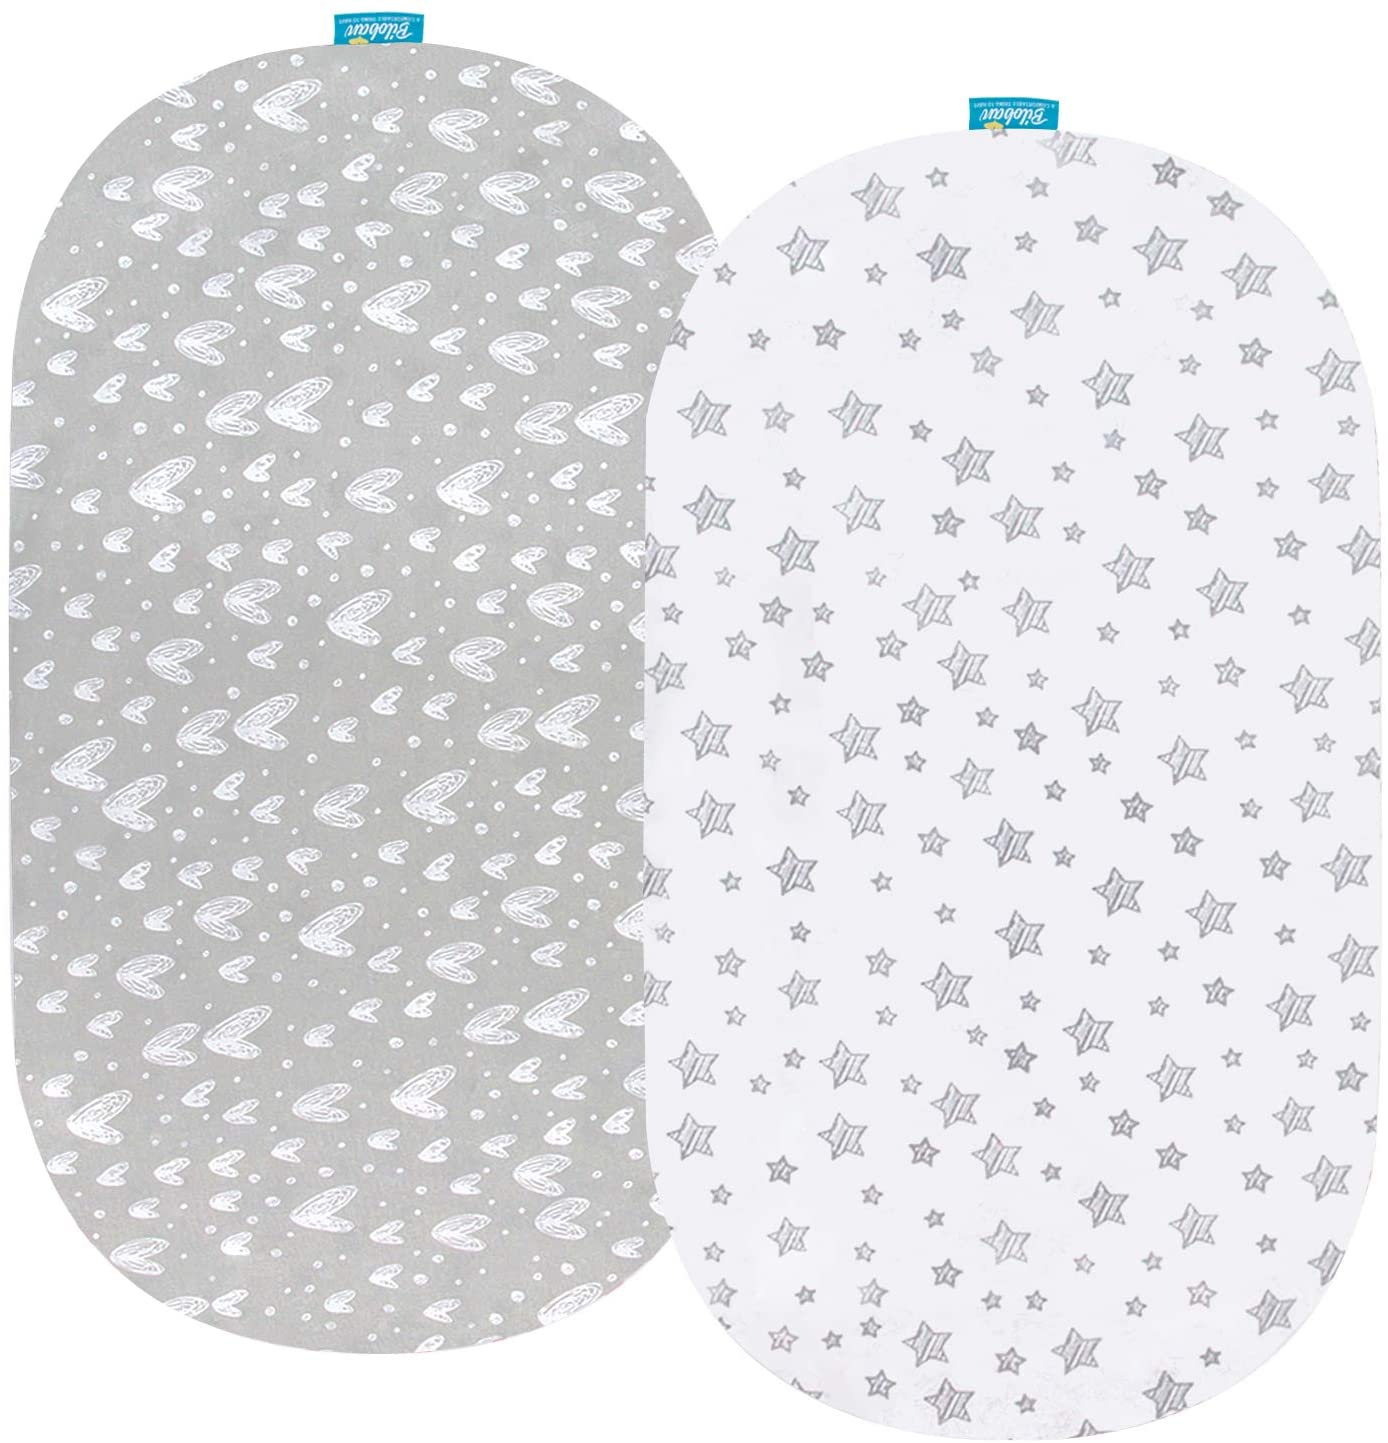 Bassinet Sheets - Fit Fisher-Price Rock with Me Bassinet, 2 Pack, 100% Jersey Cotton, Grey & White - Biloban Online Store